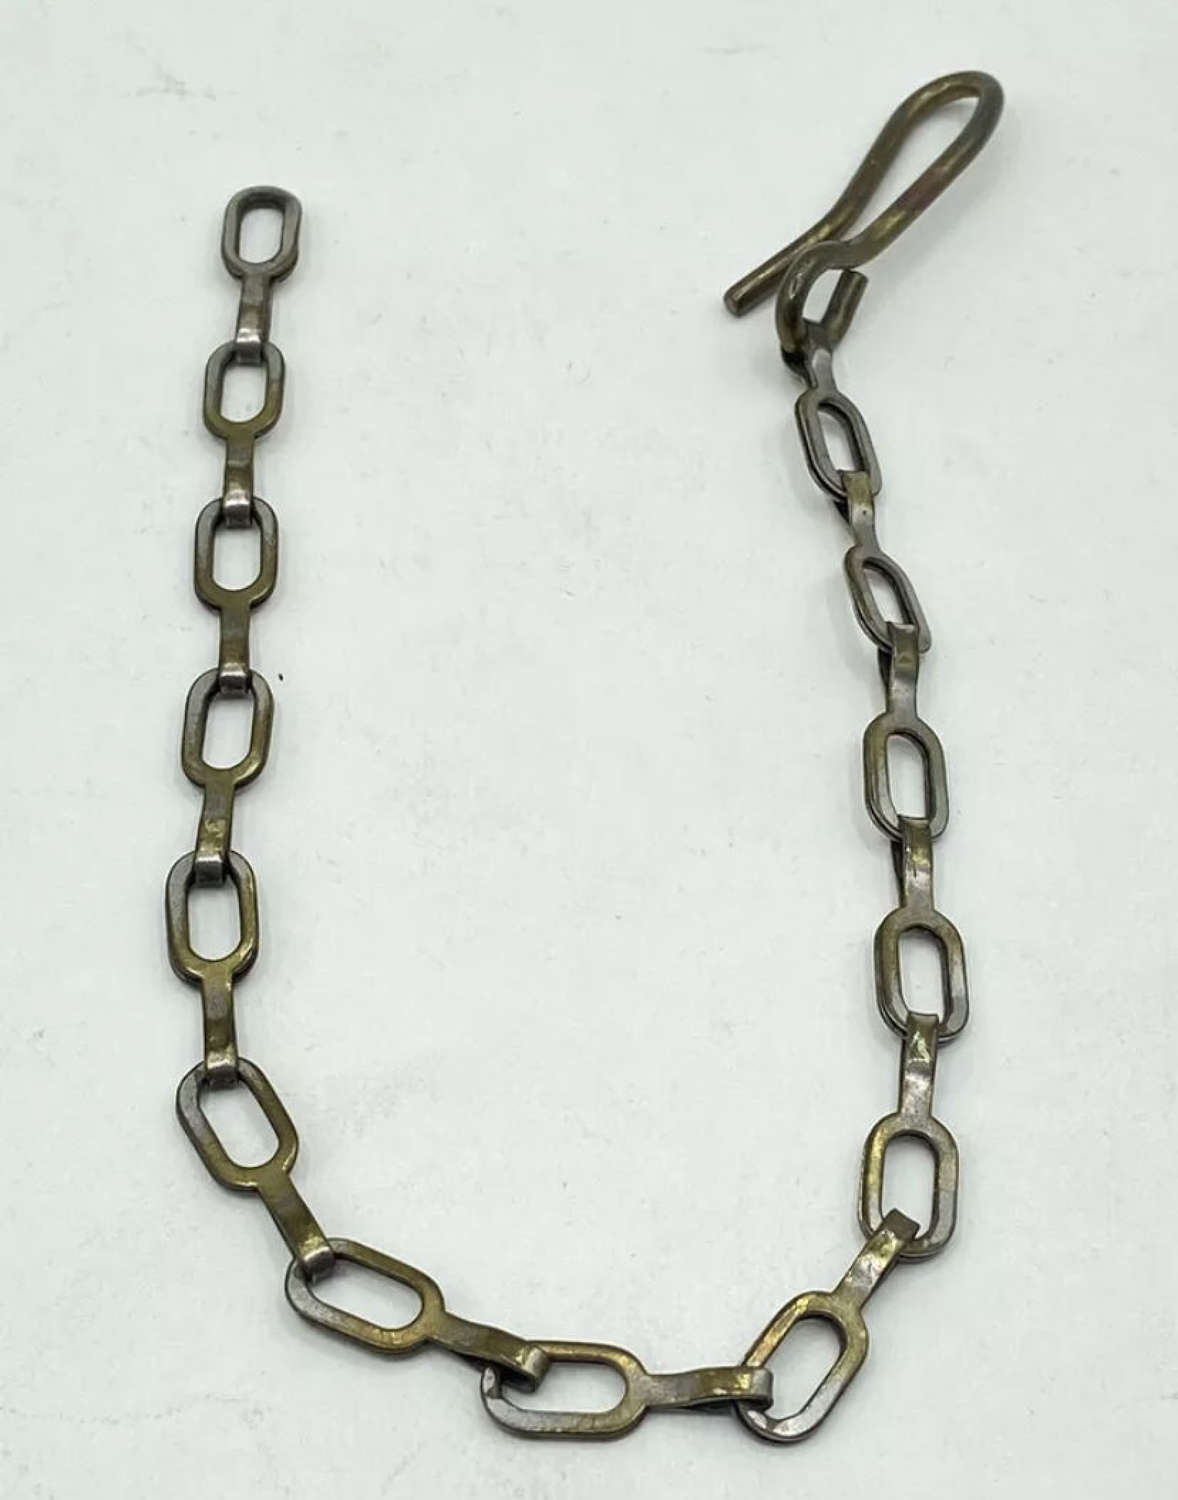 WW2 Whistle Chain used by Army Air-Force Navy Civil Defence Etc